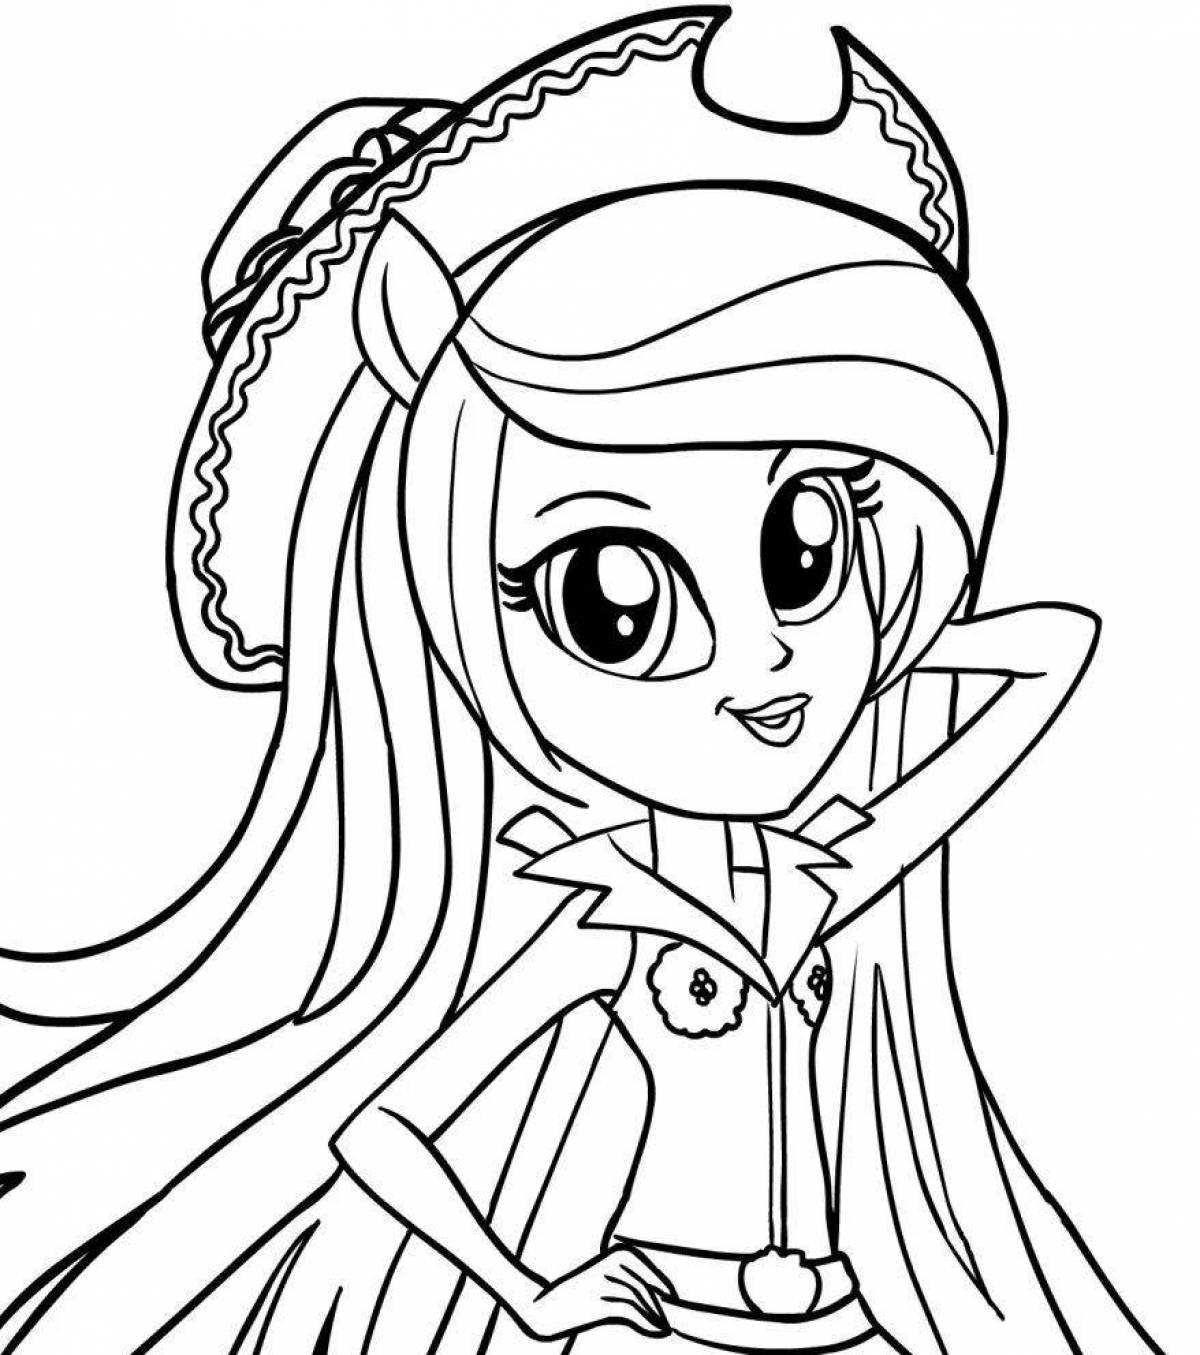 Vibrant pony doll coloring page